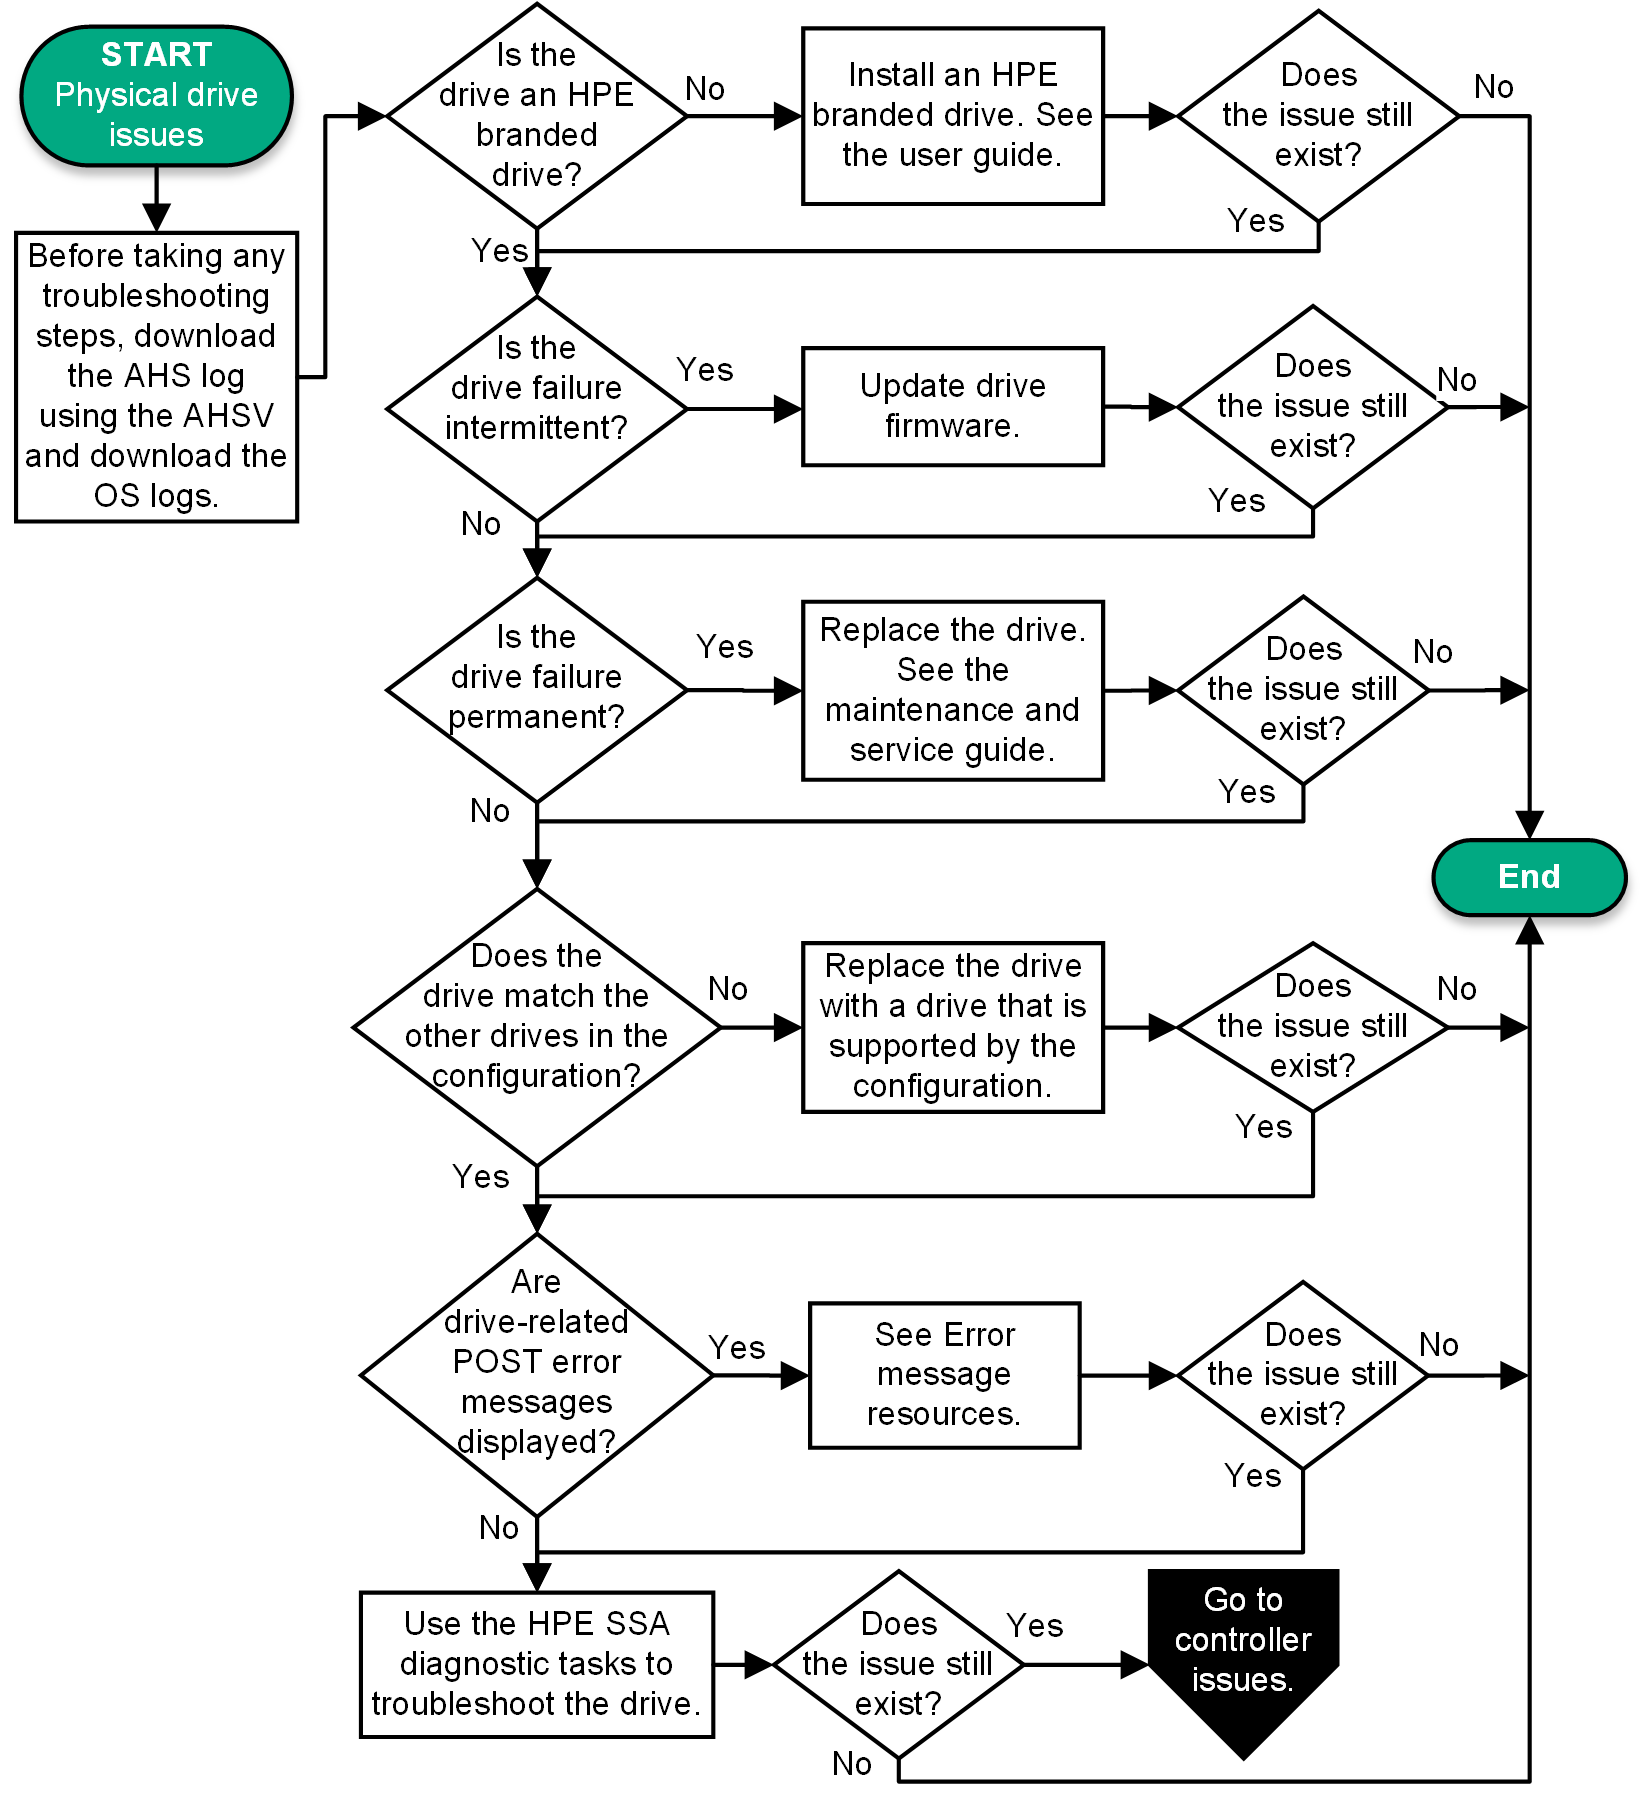 Physical drive issues flowchart